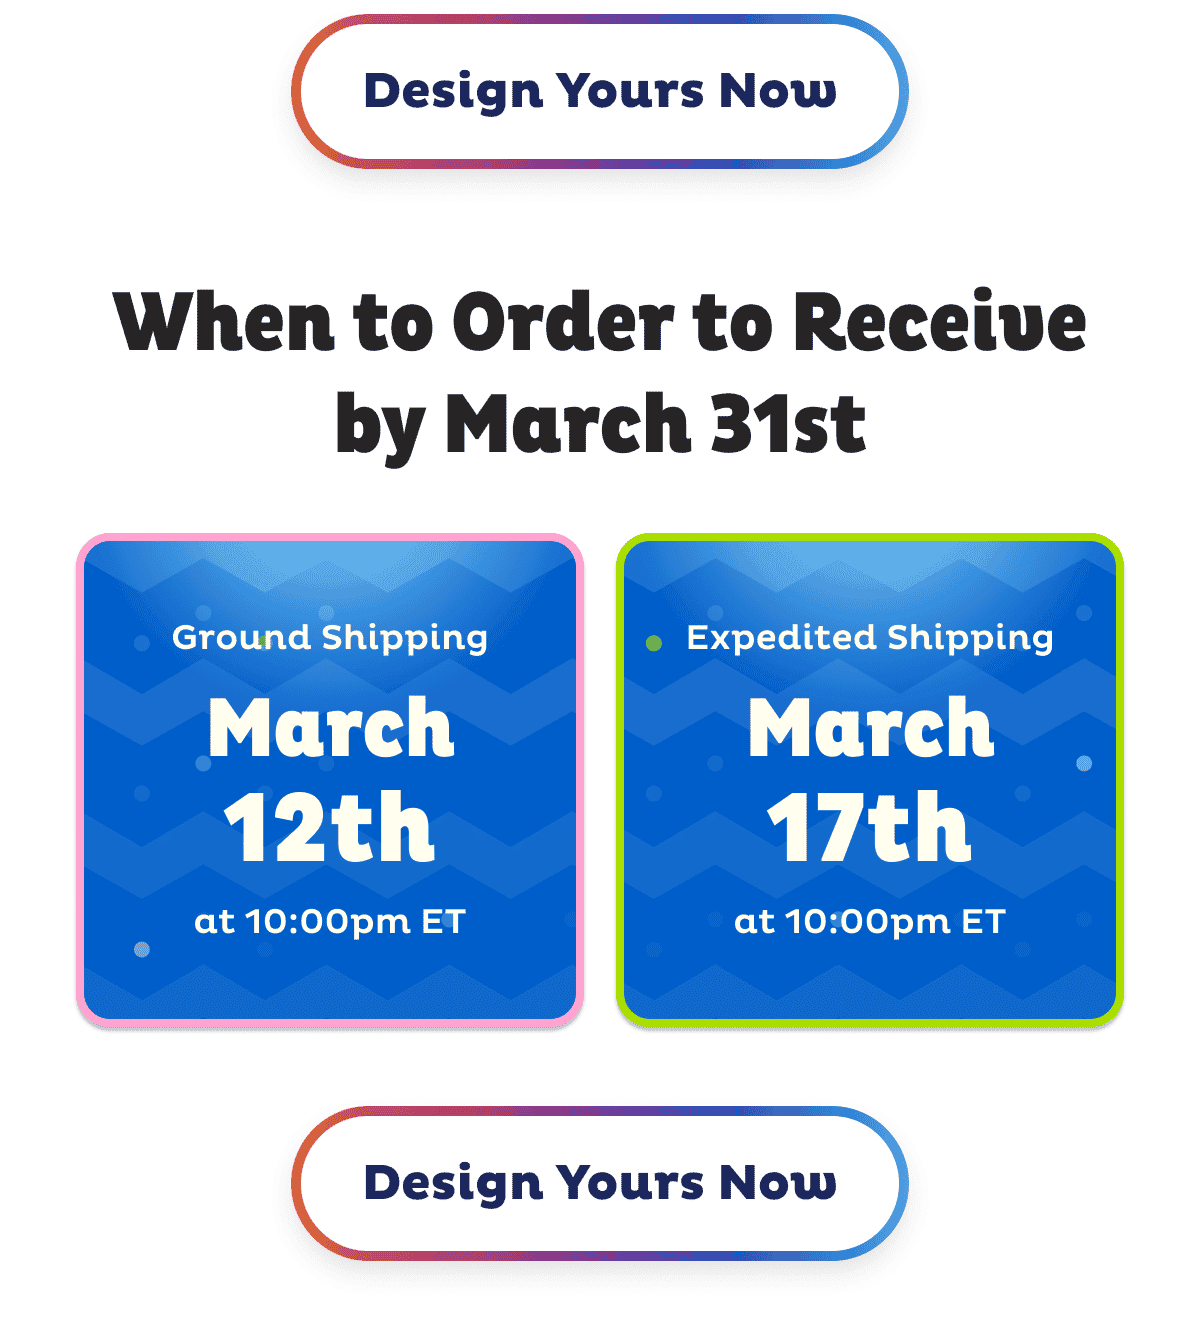 Order Ground Shipping by March 12 Order Expedited Shipping By March 17 to receive by March 31